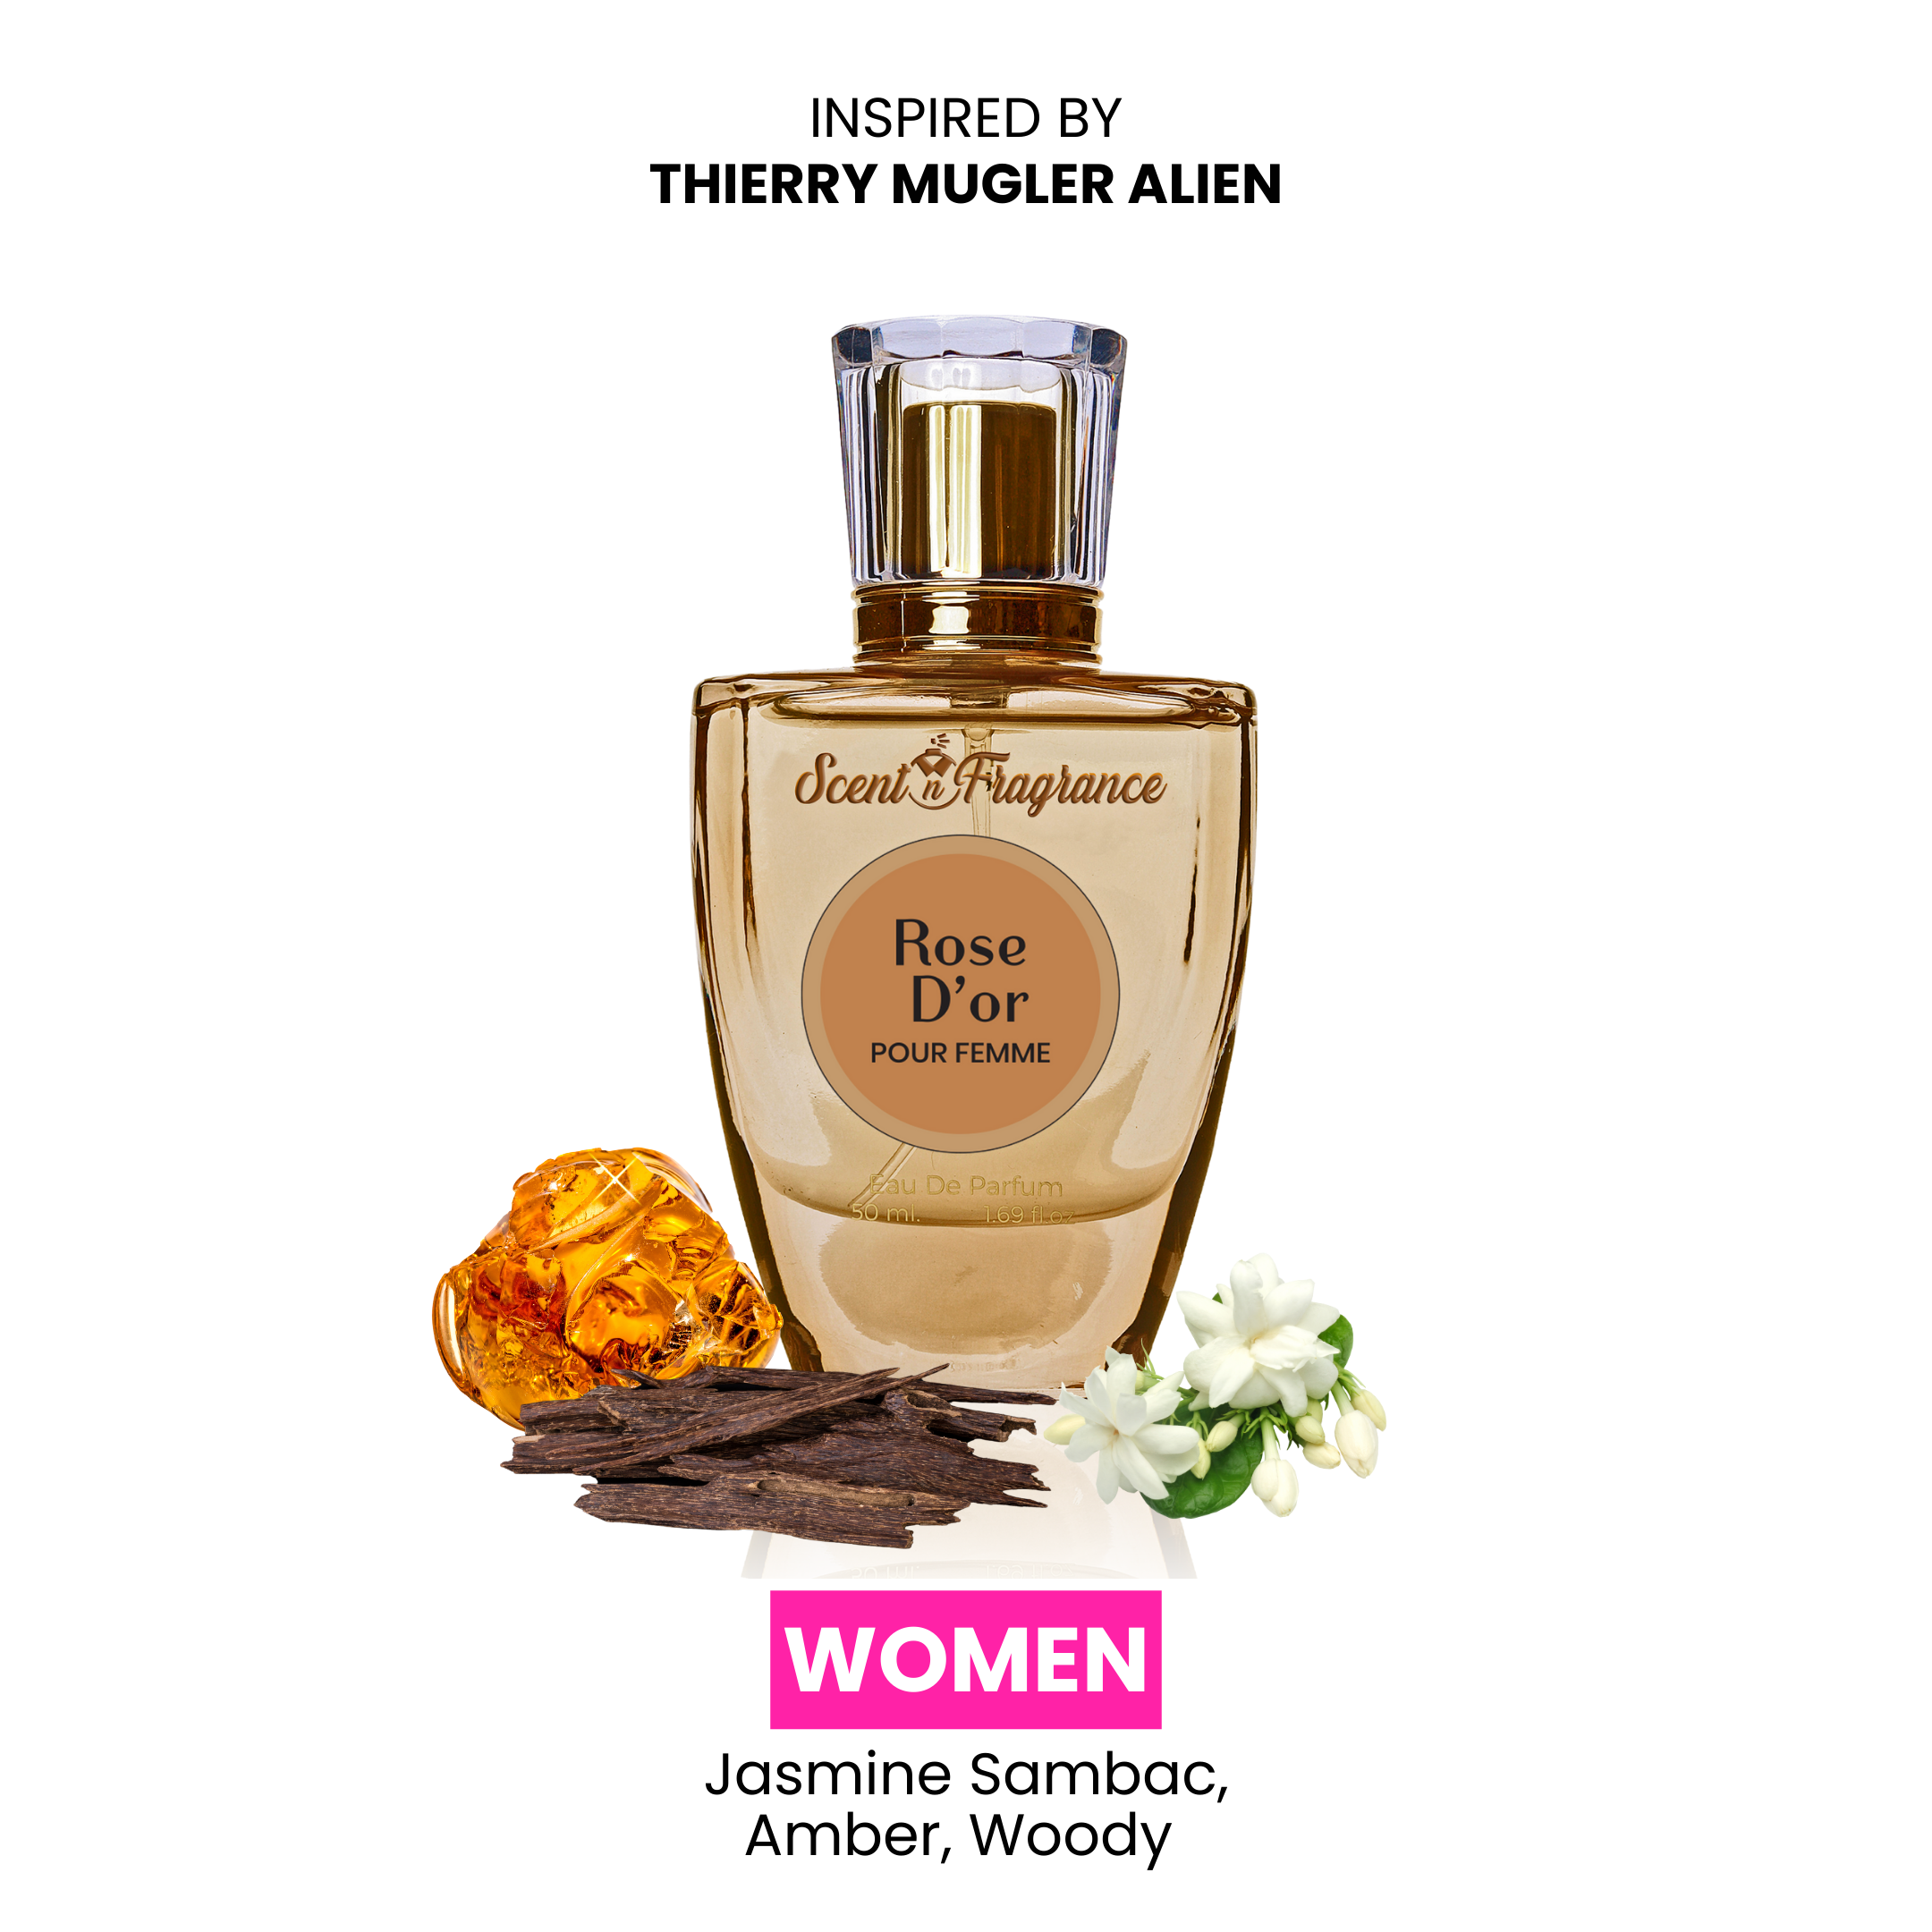 ROSE D'OR - INSPIRED BY THIERRY MUGLER ALIEN by Scent N Fragrance